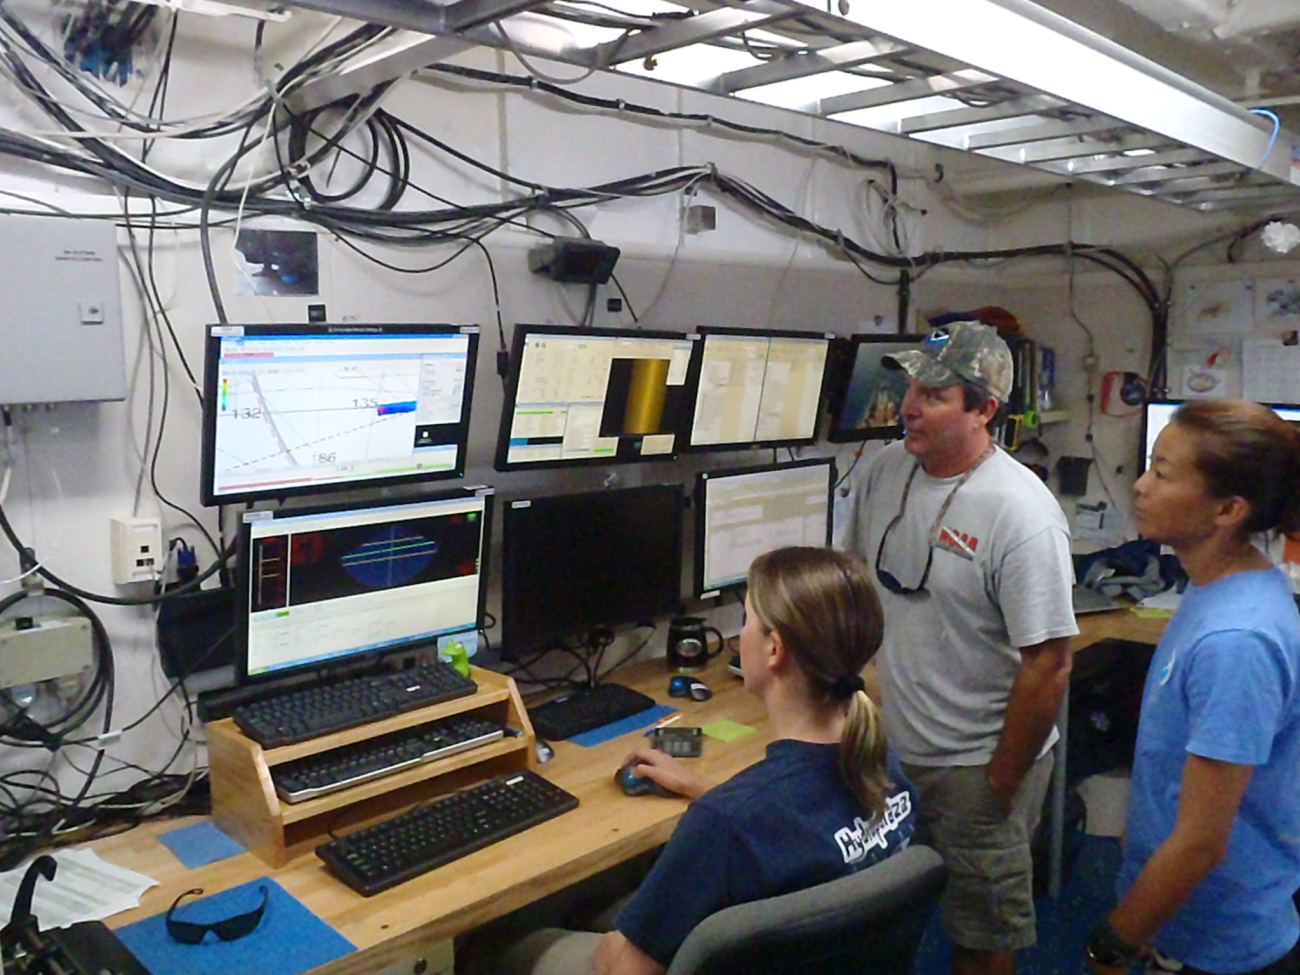 Monitoring survey operations on the NOAA Ship NANCY FOSTER